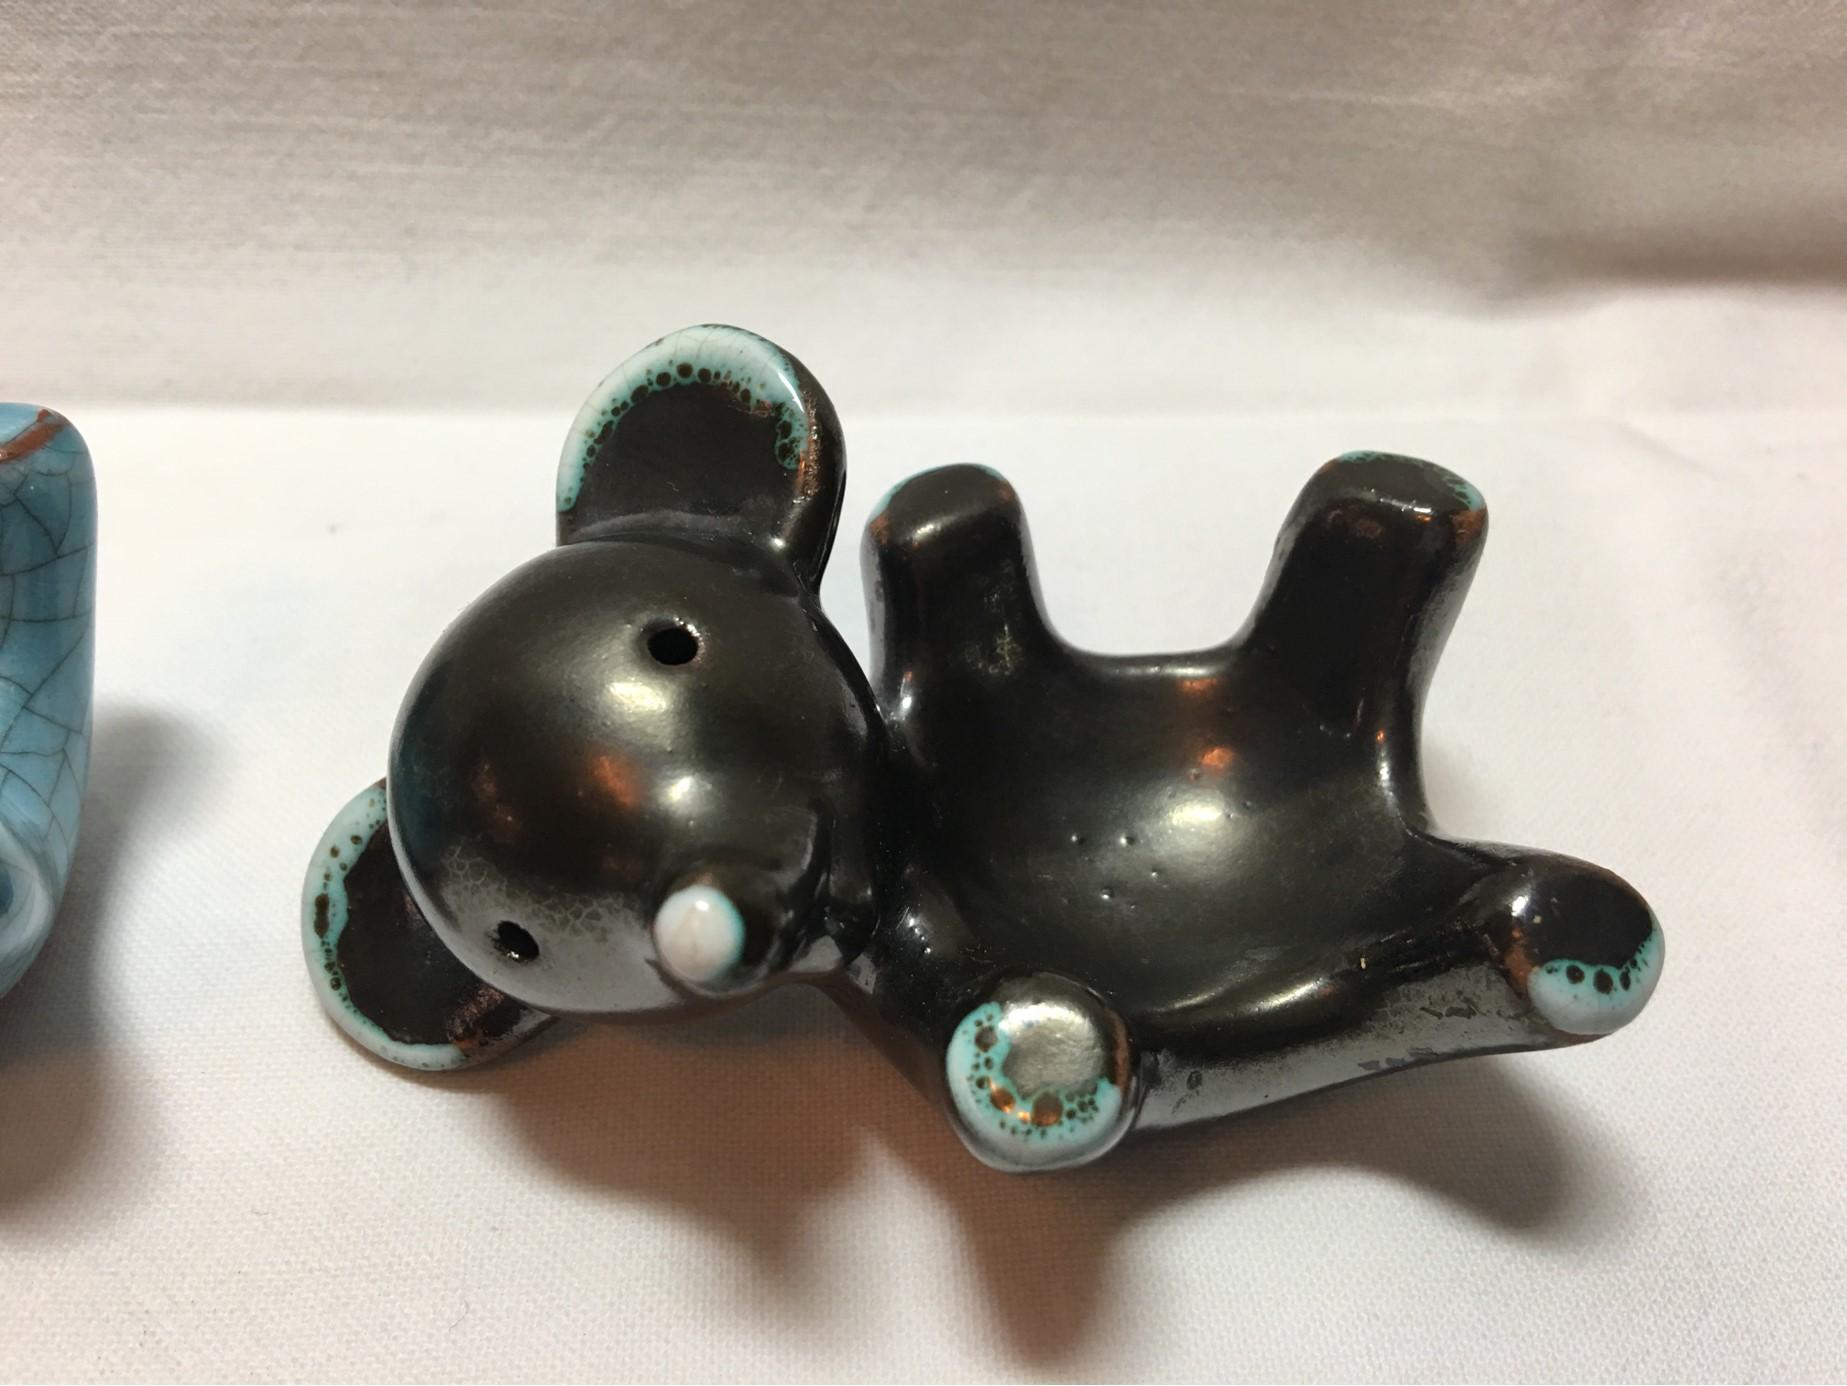 Two ceramic egg cups in the shape of cute little bears. Designed by Walter Bosse of Austria who was employed by Karlsruhe Majolika from 1953 onward. He contributed many designs to their collection most prominently in Animal forms with practical or